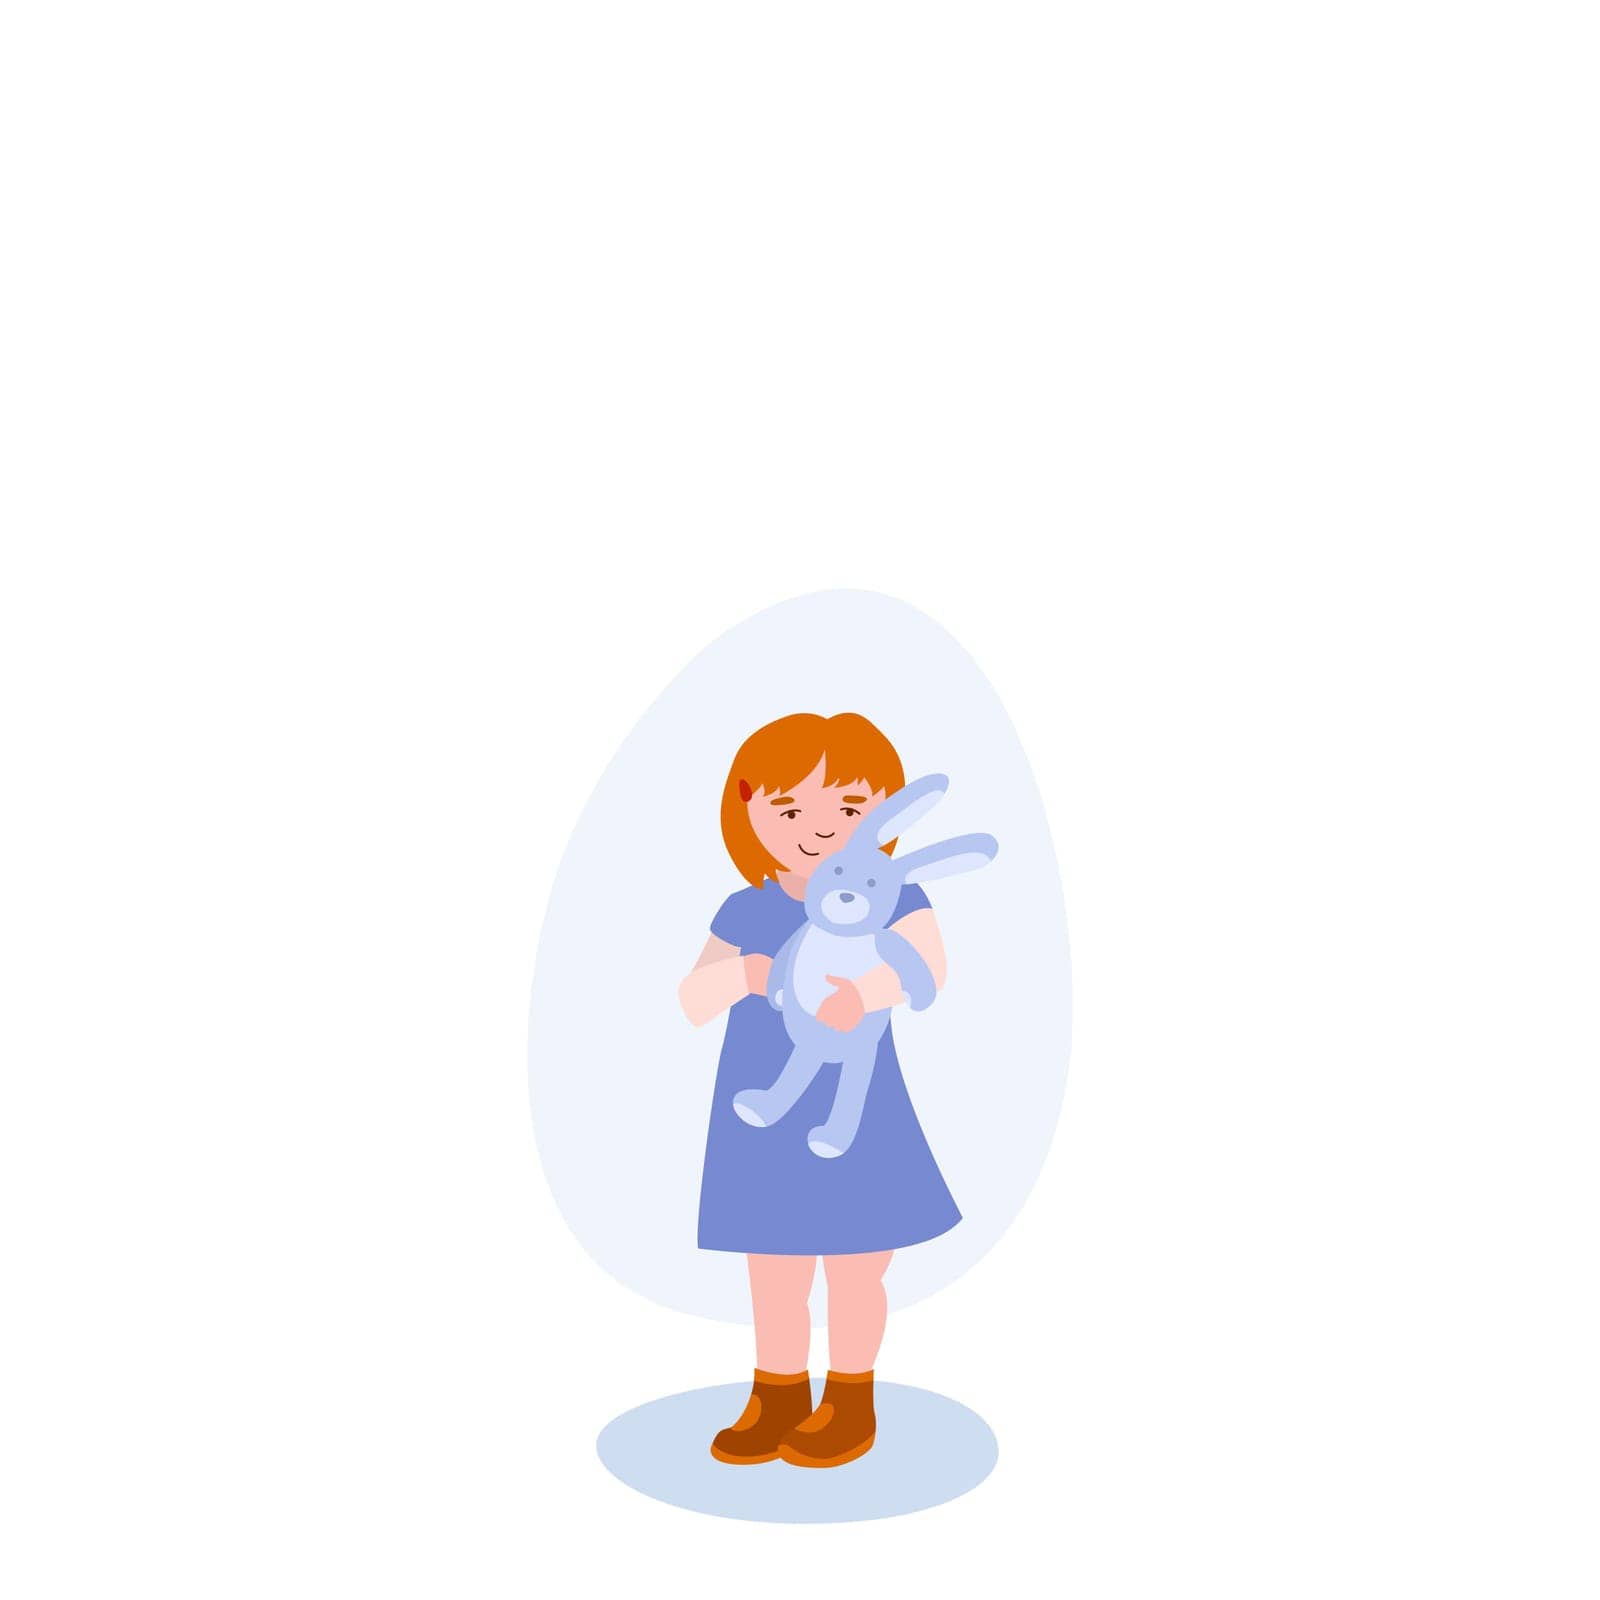 Small Girl With Bunny illustration. Girl, child, toy, bunny. Creative editable vector graphic design.